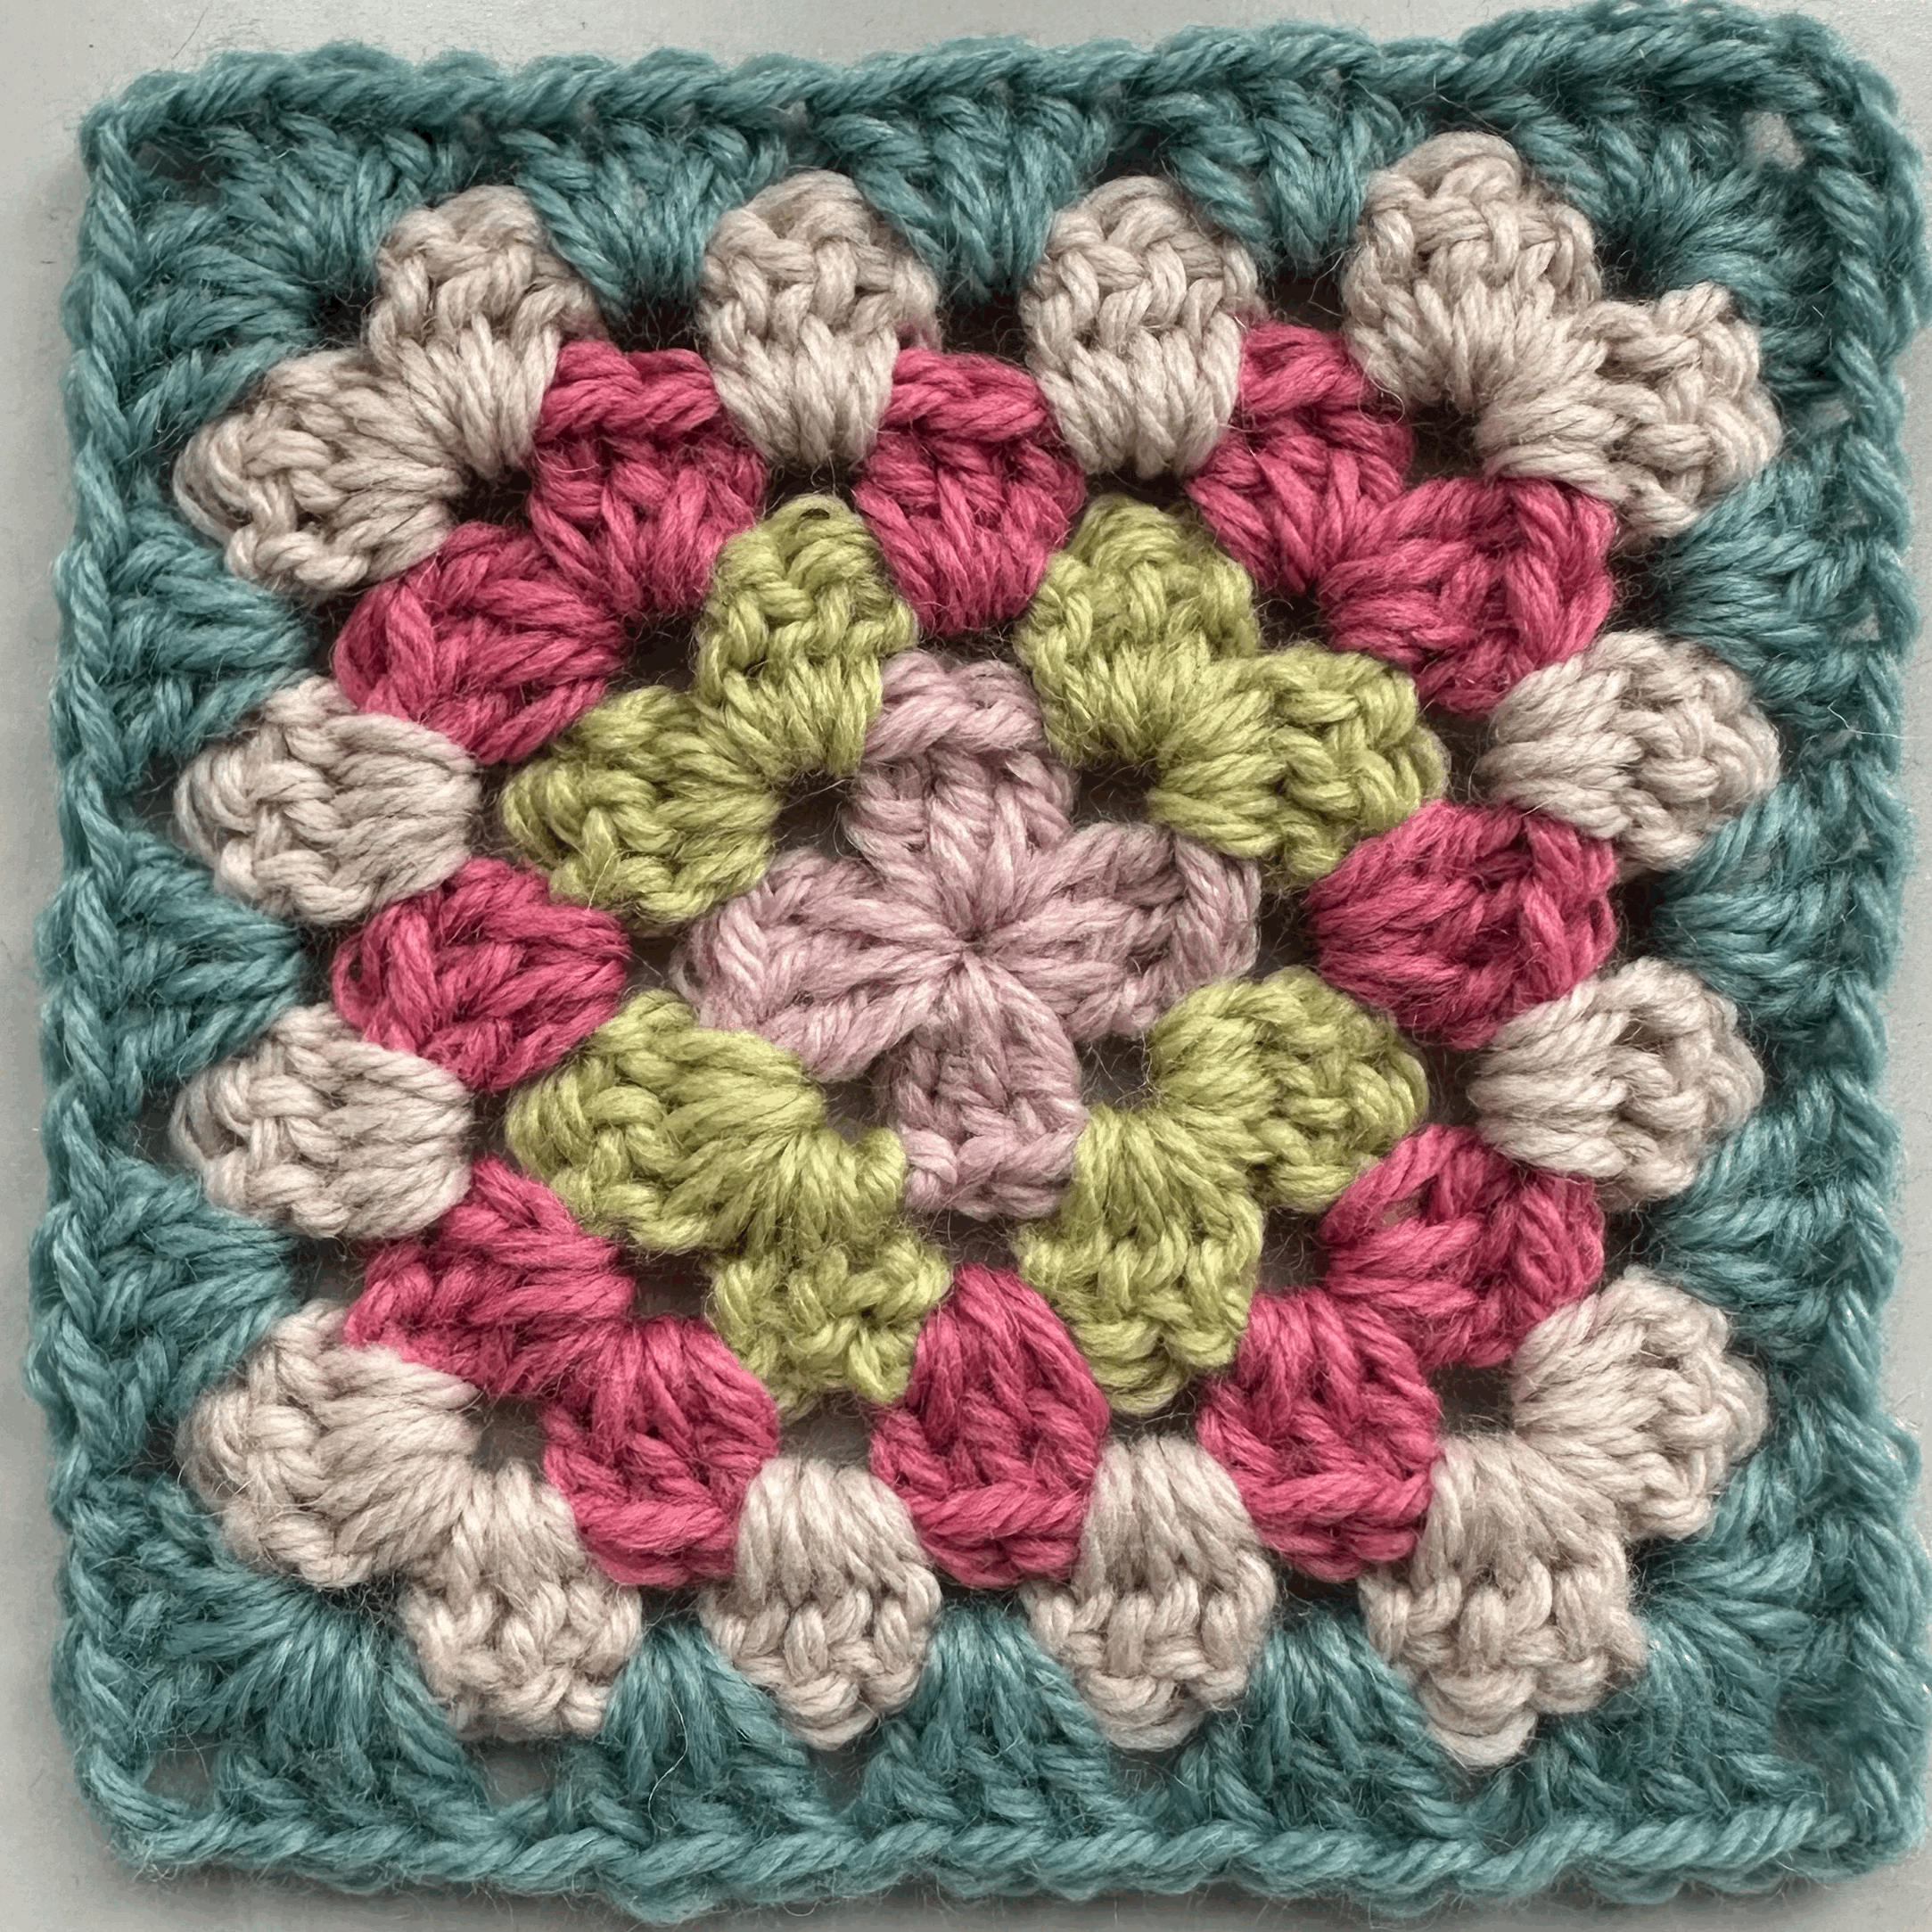 Join Granny Squares  Want to see 5 different ways to connect